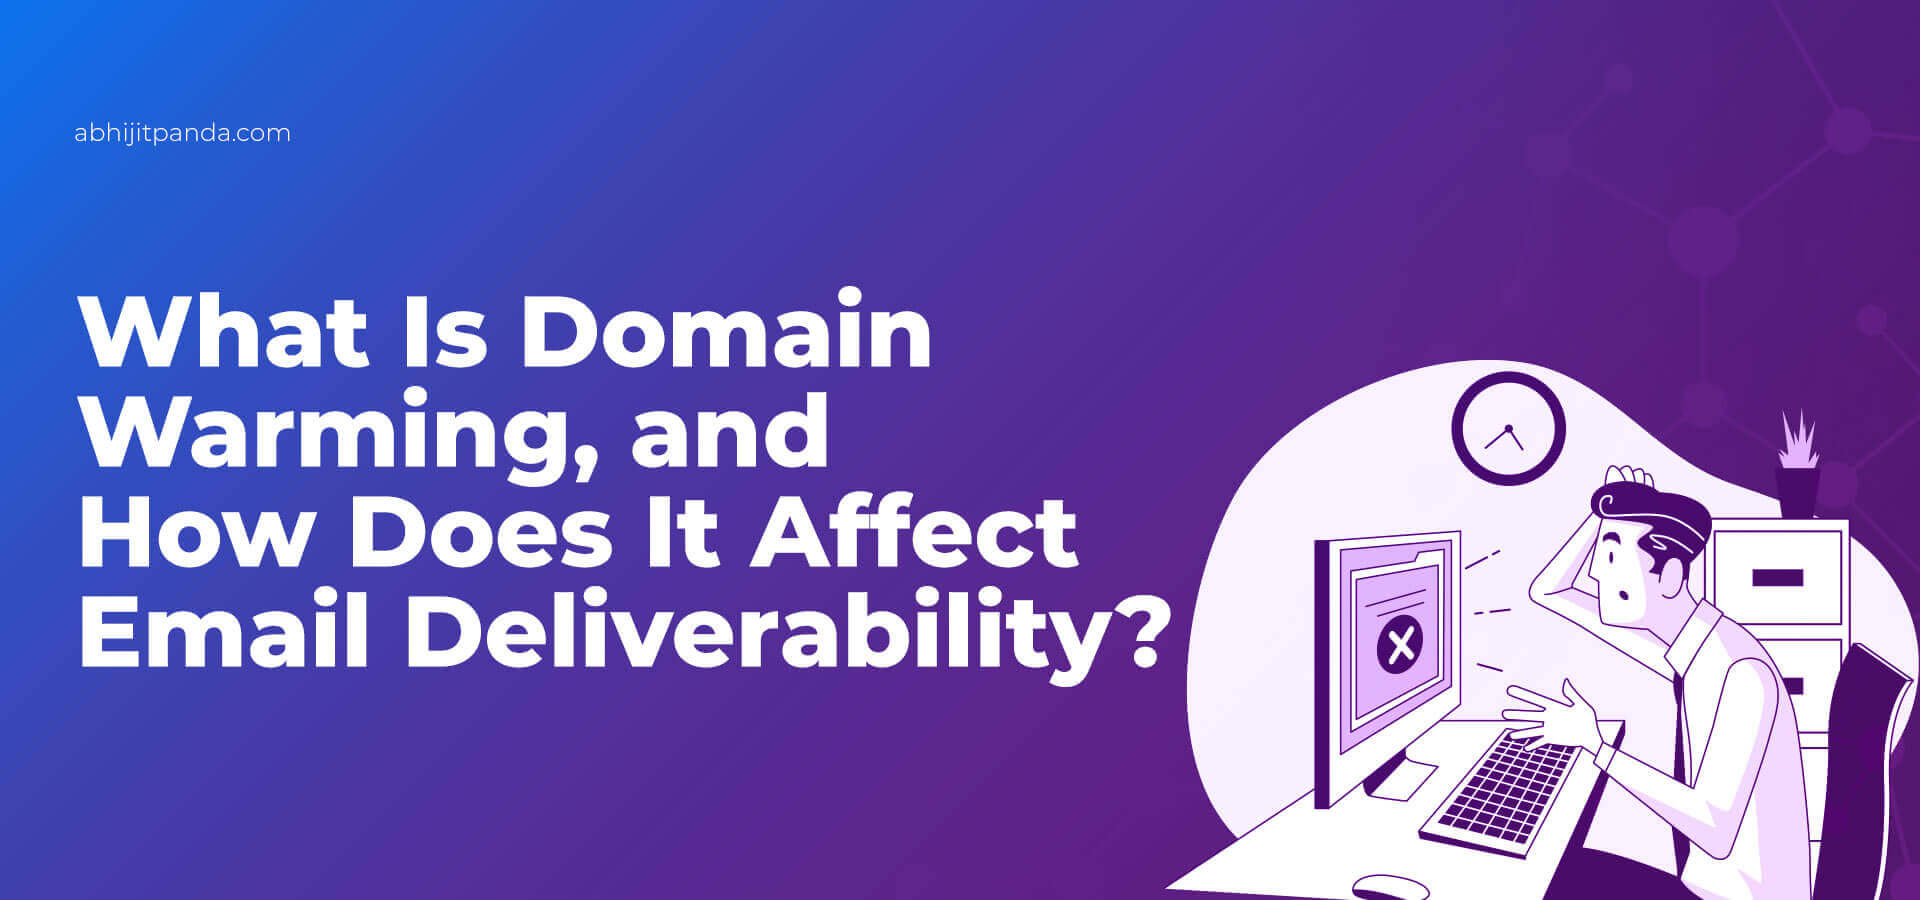 Domain Warming and Email Deliverability